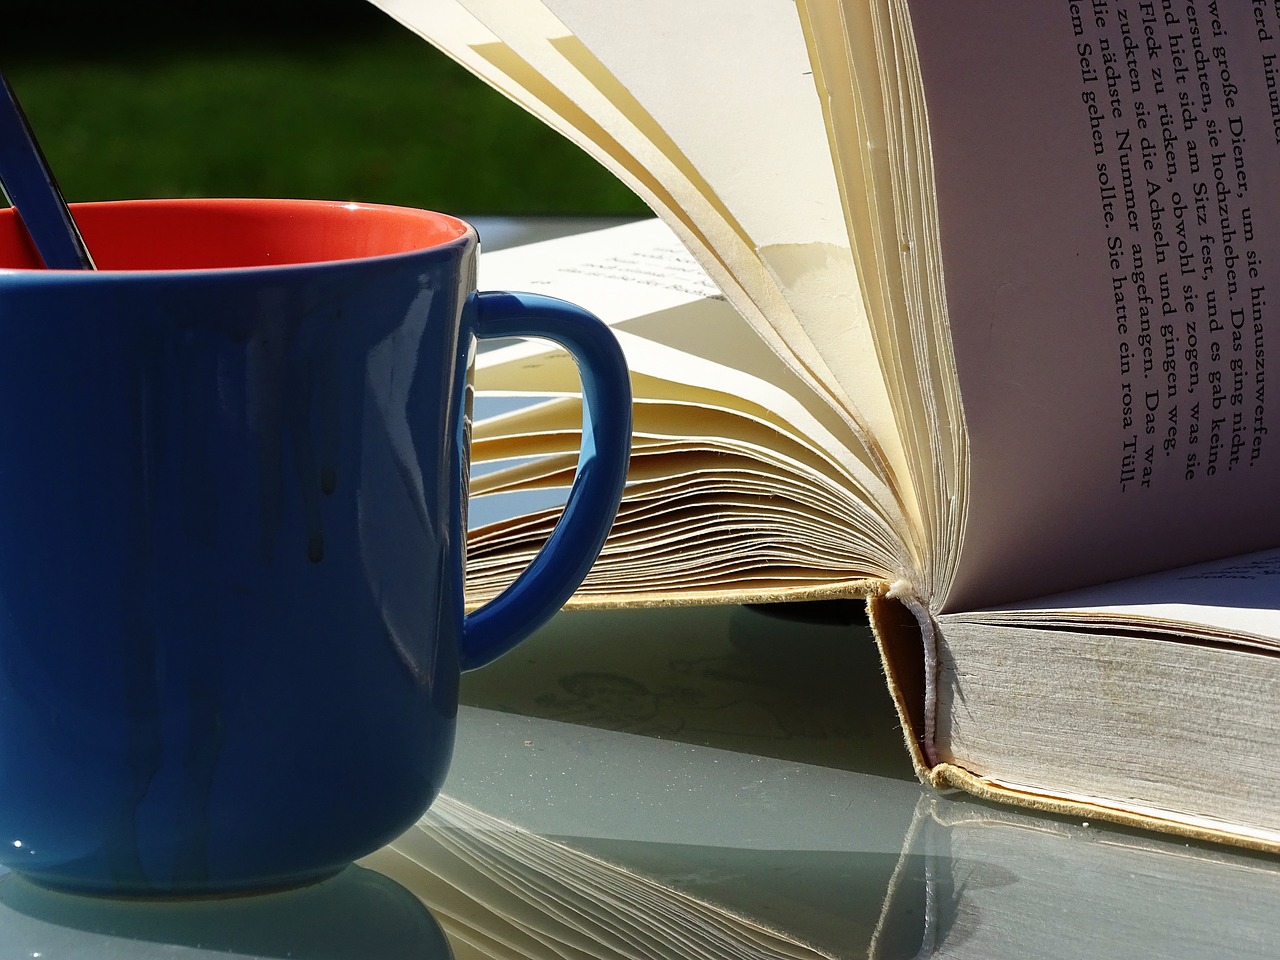 cup books read free photo